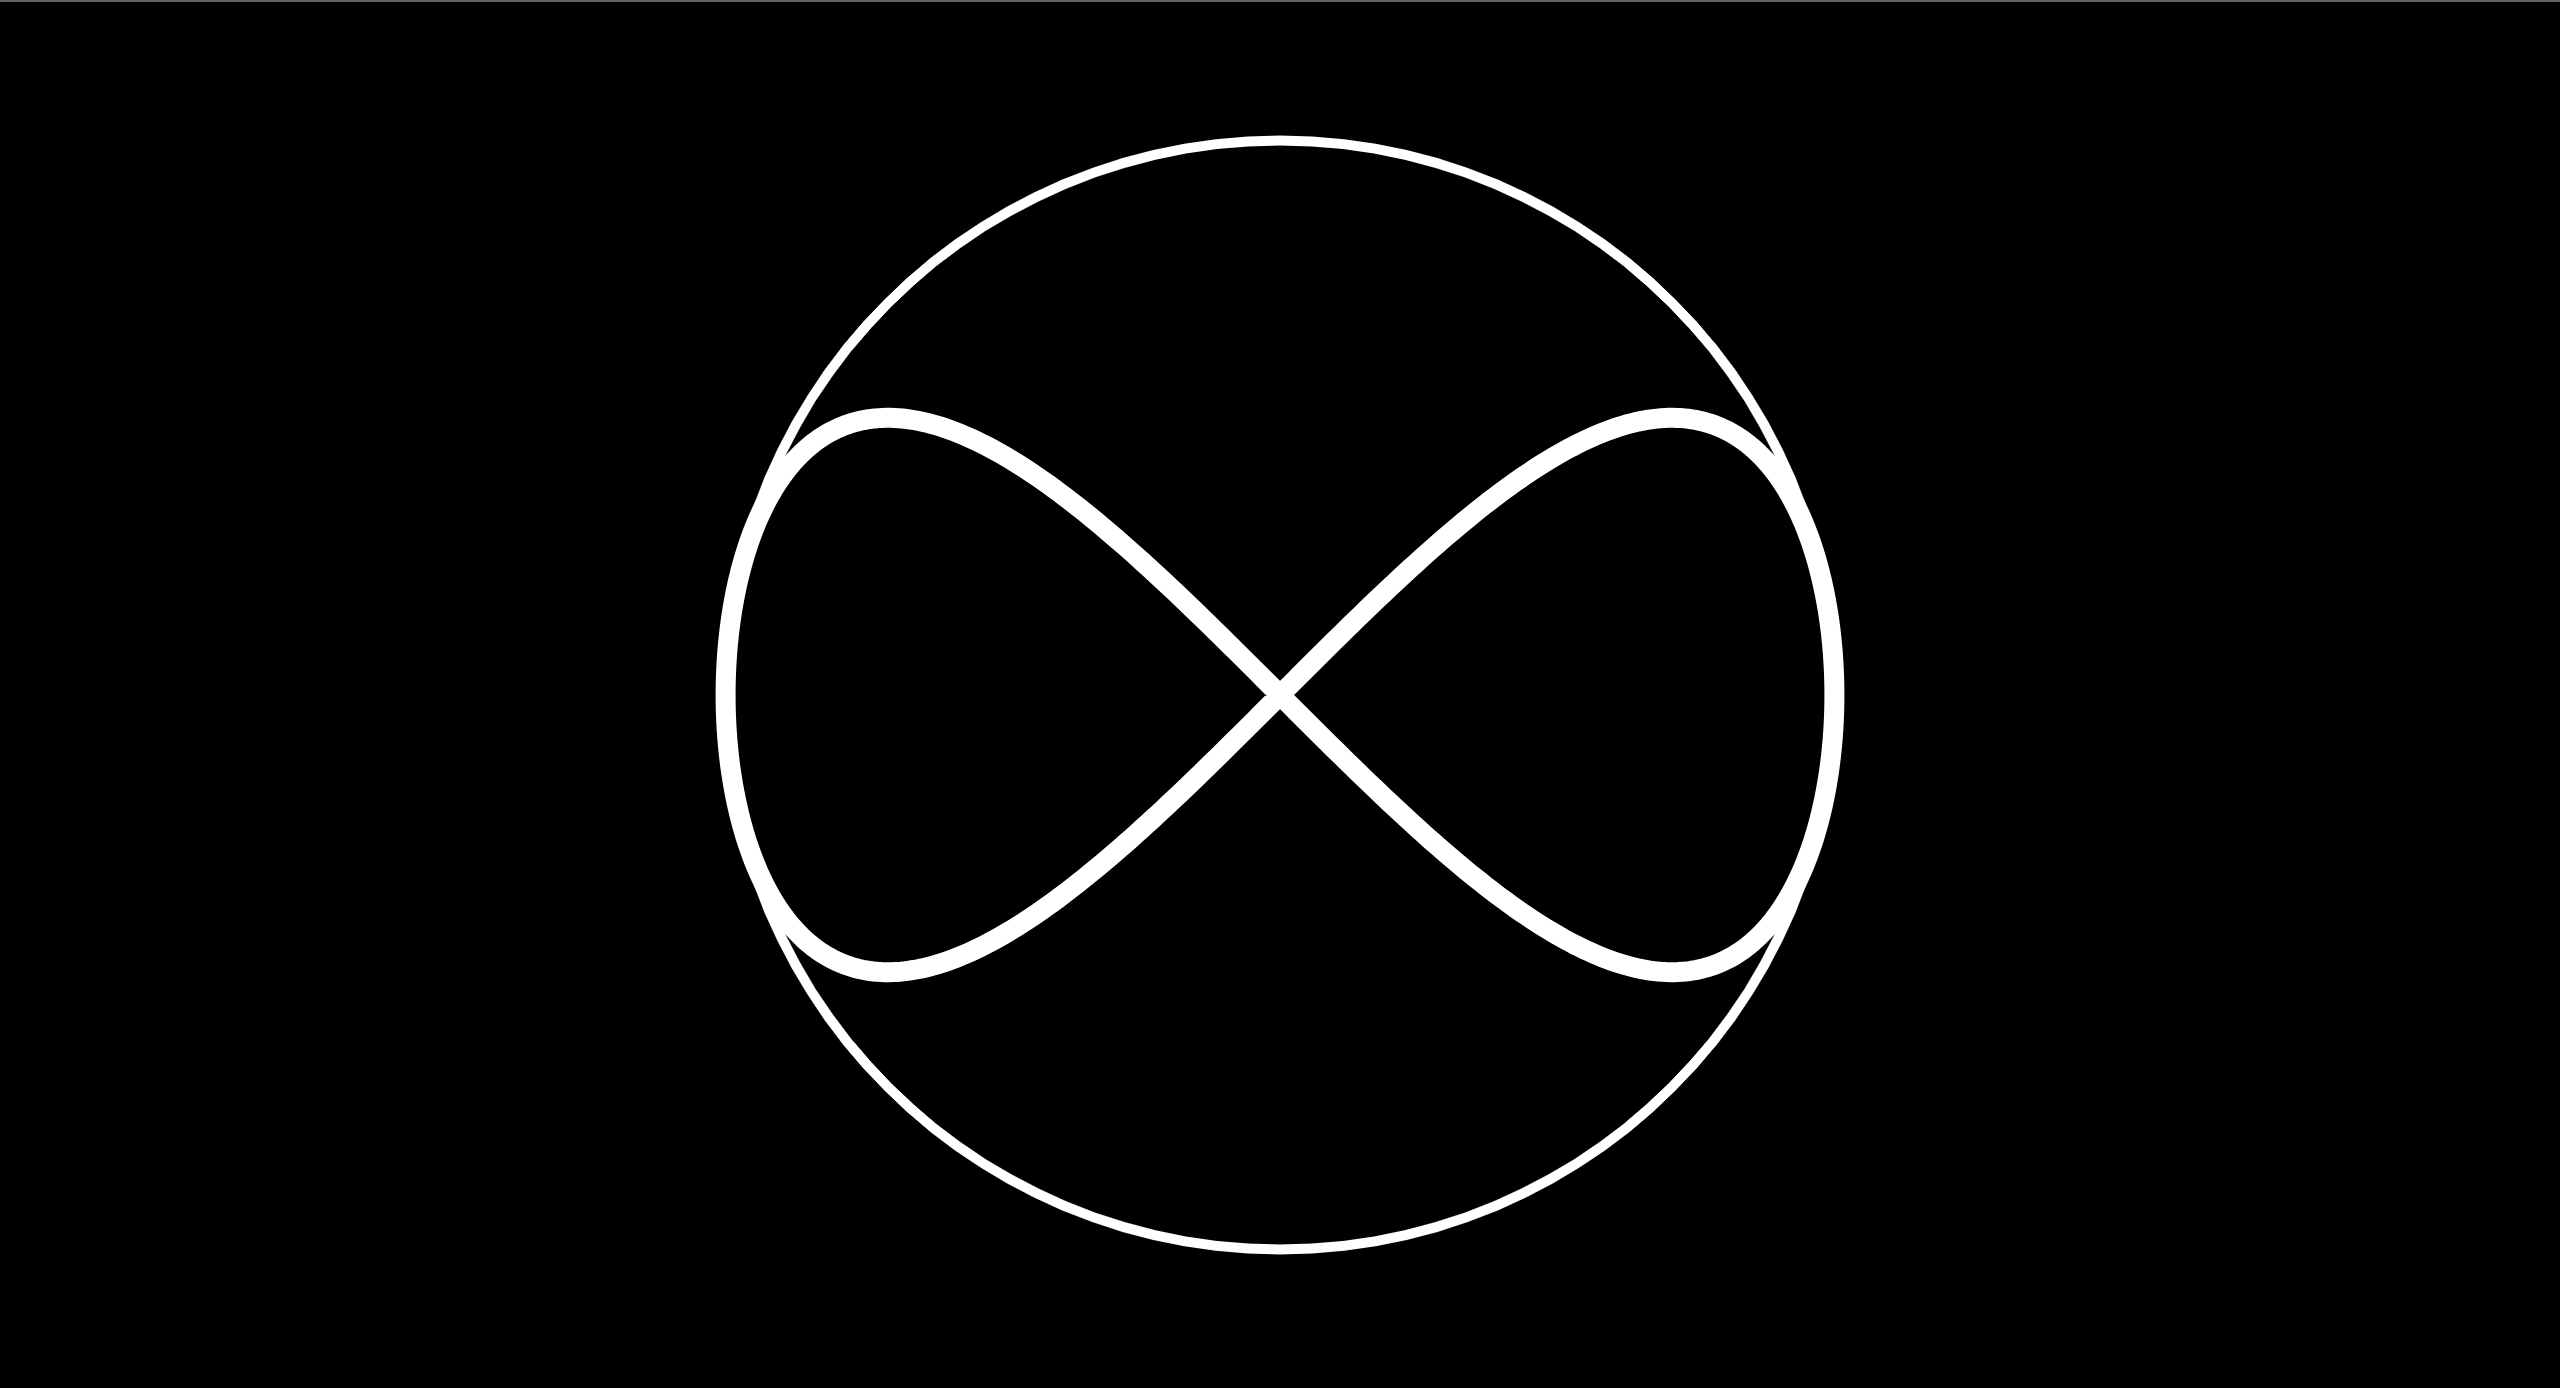 A white circle with a white infinite symbol in the middle on a black background